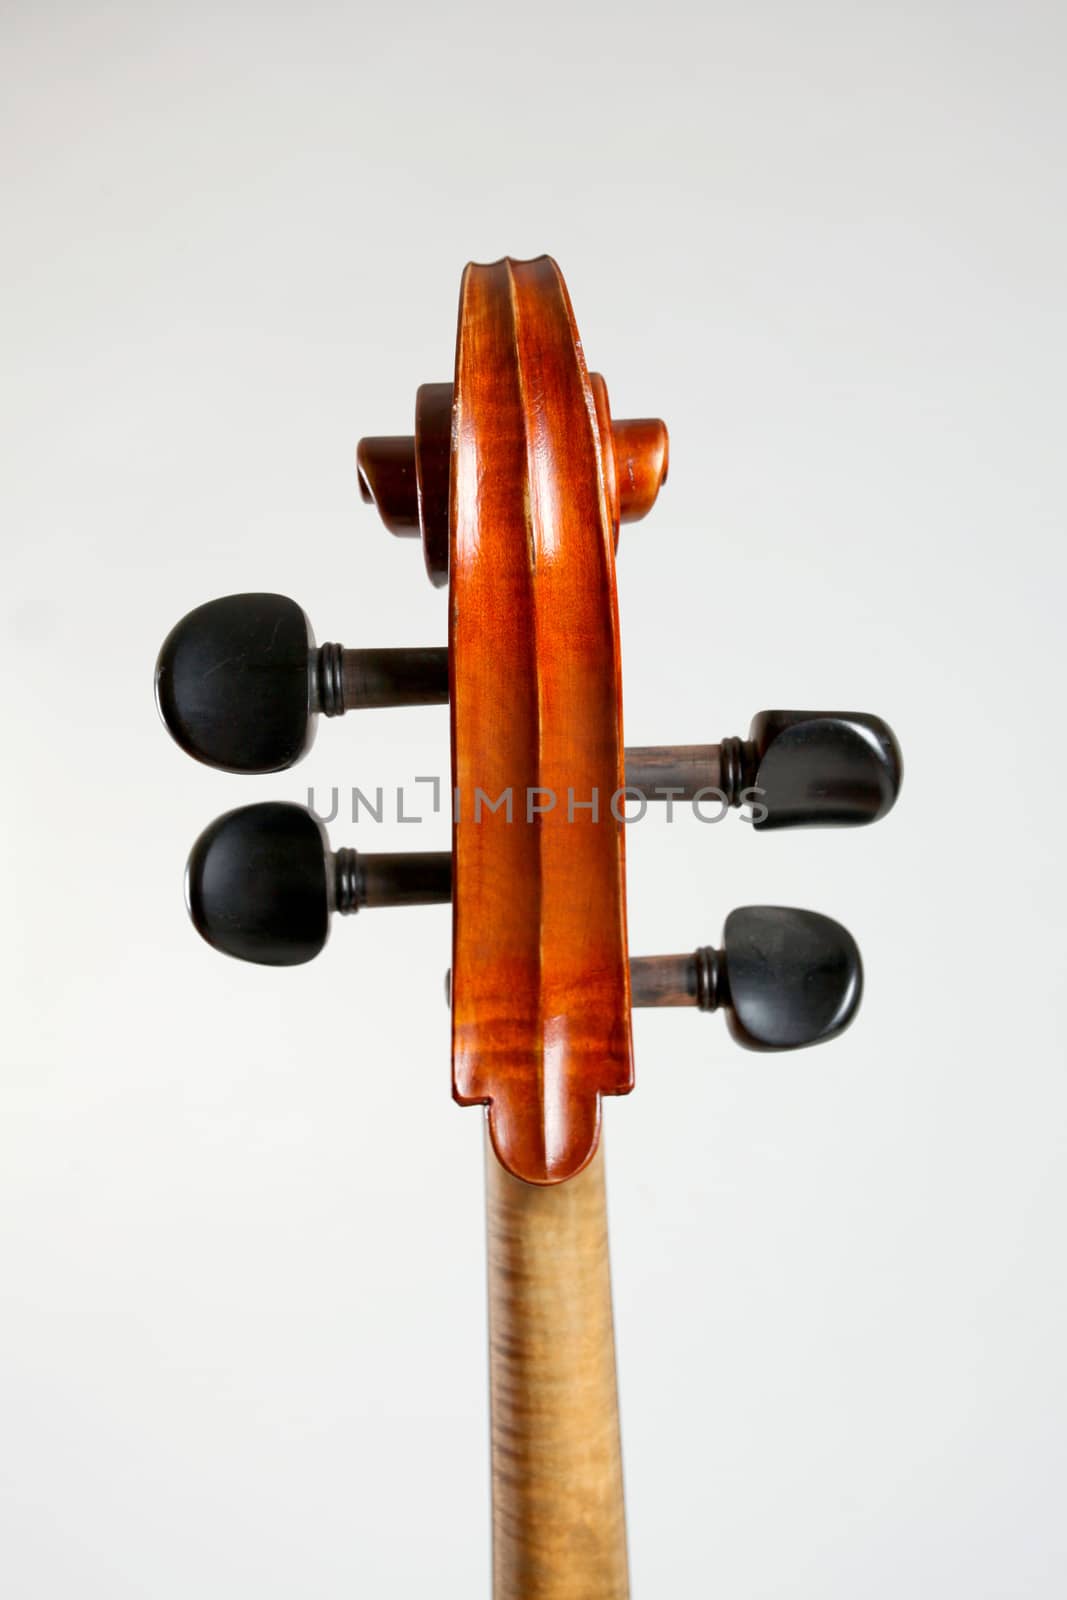 Old double bass head isolated on white background